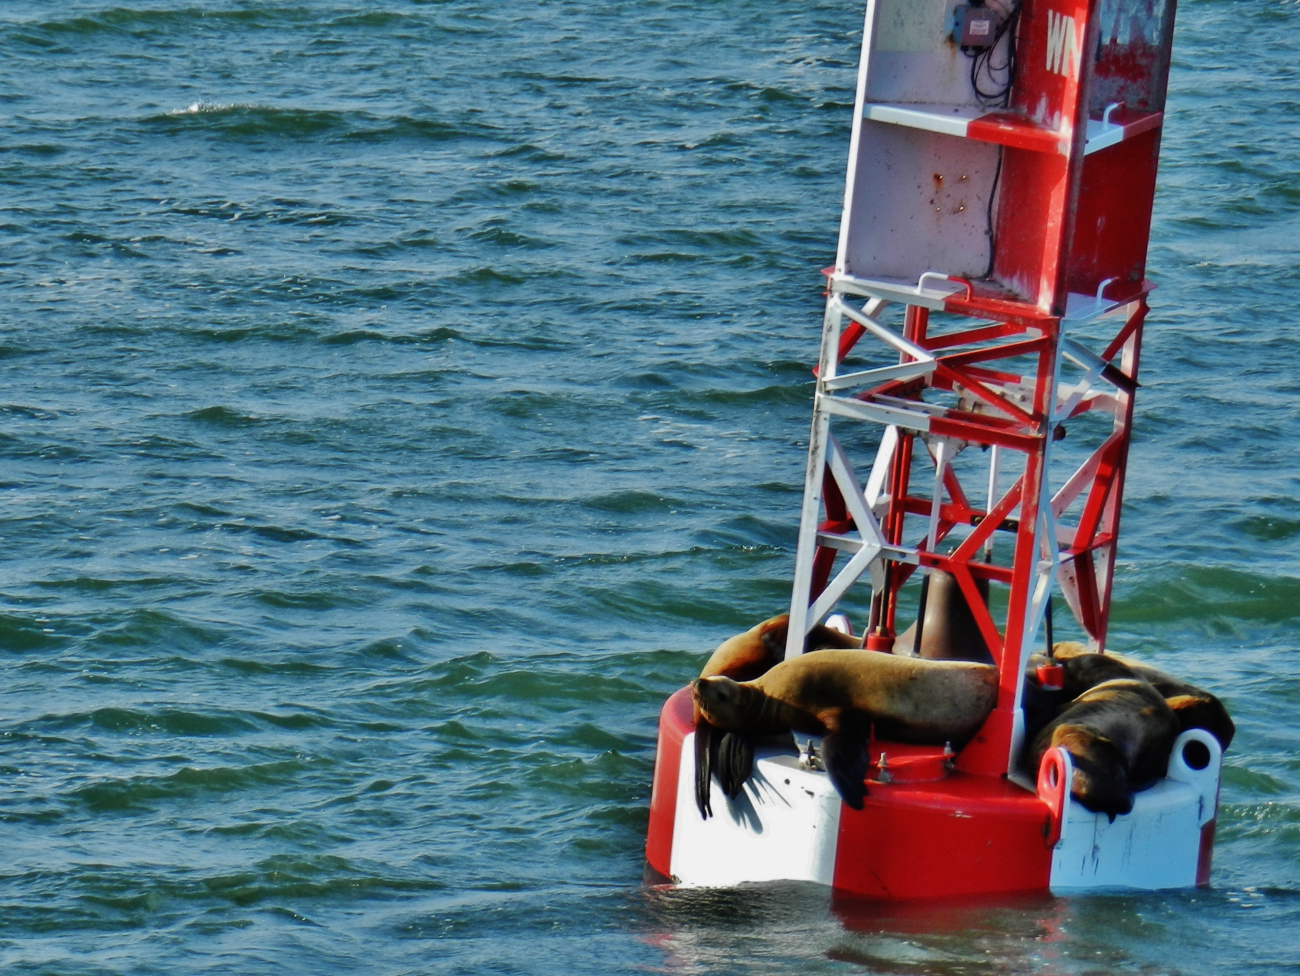 California sea lions hanging out on a buoy